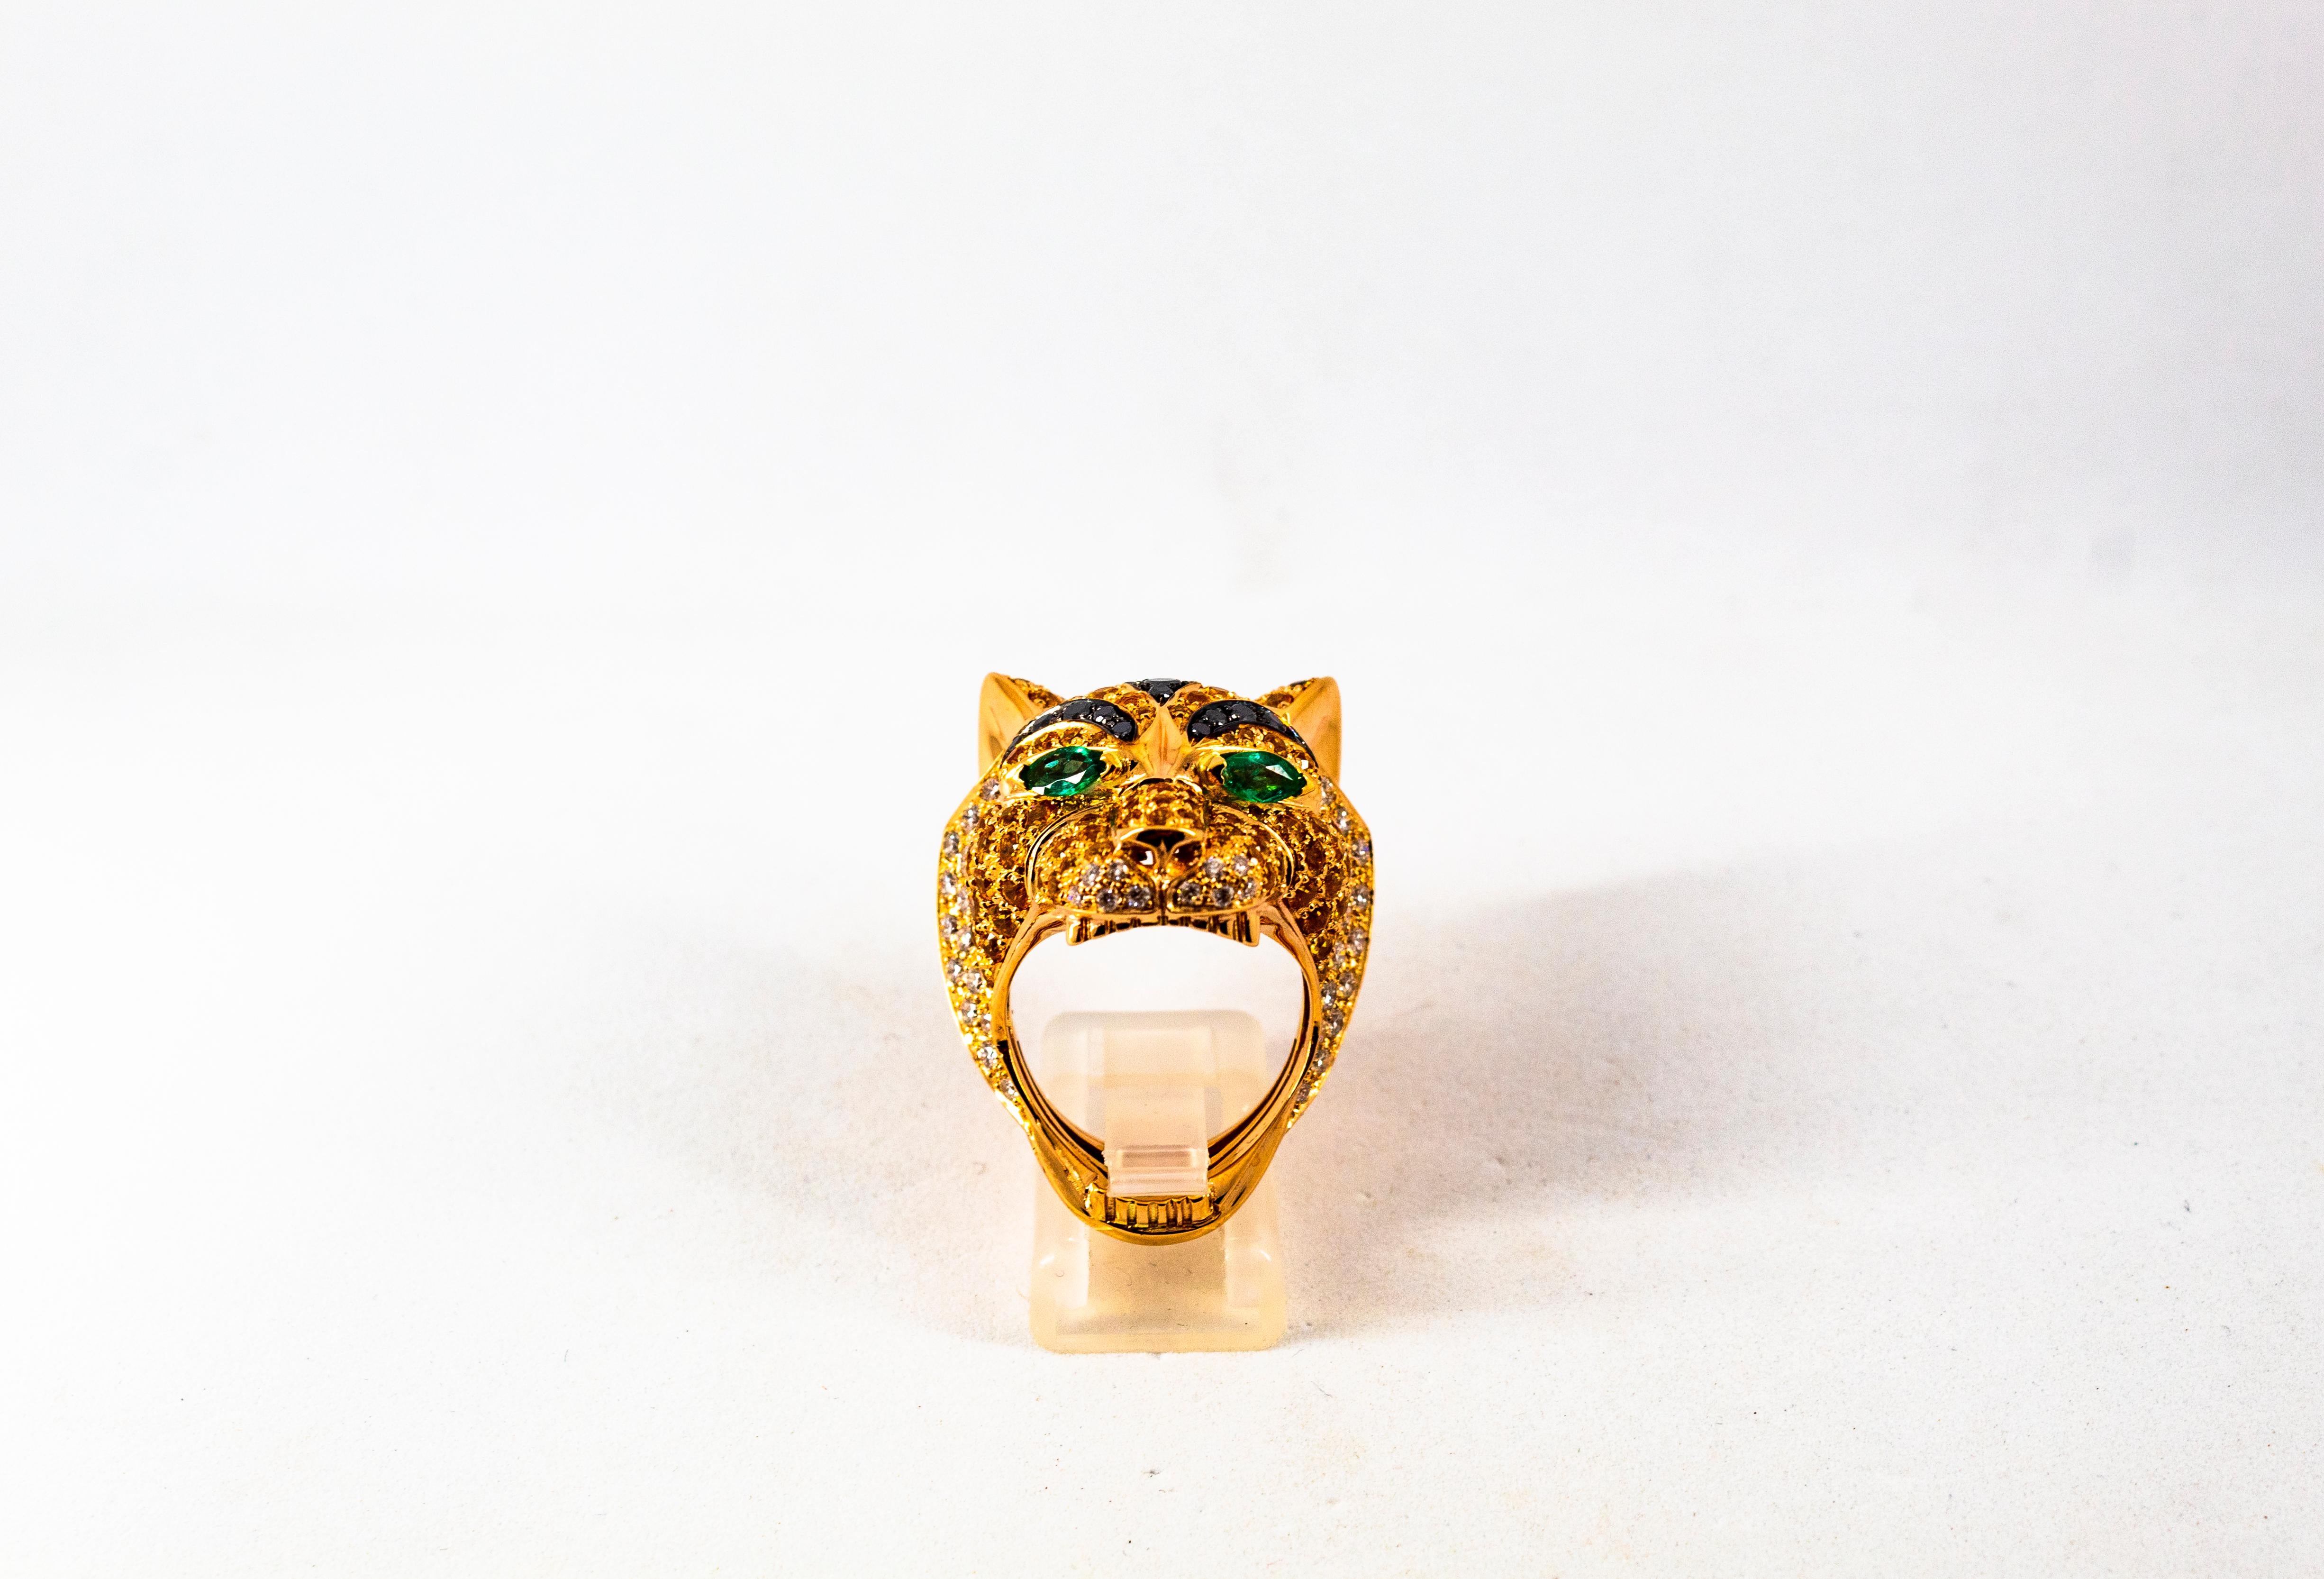 This Ring is made of 14K Yellow Gold.
This Ring has 1.10 Carats of White Diamonds.
This Ring has 0.40 Carats of Black Diamonds.
This Ring has 0.40 Carats of Emeralds.
This Ring has 5.00 Carats of Yellow Sapphires.
Size ITA: 16 USA: 7 1/2
We're a